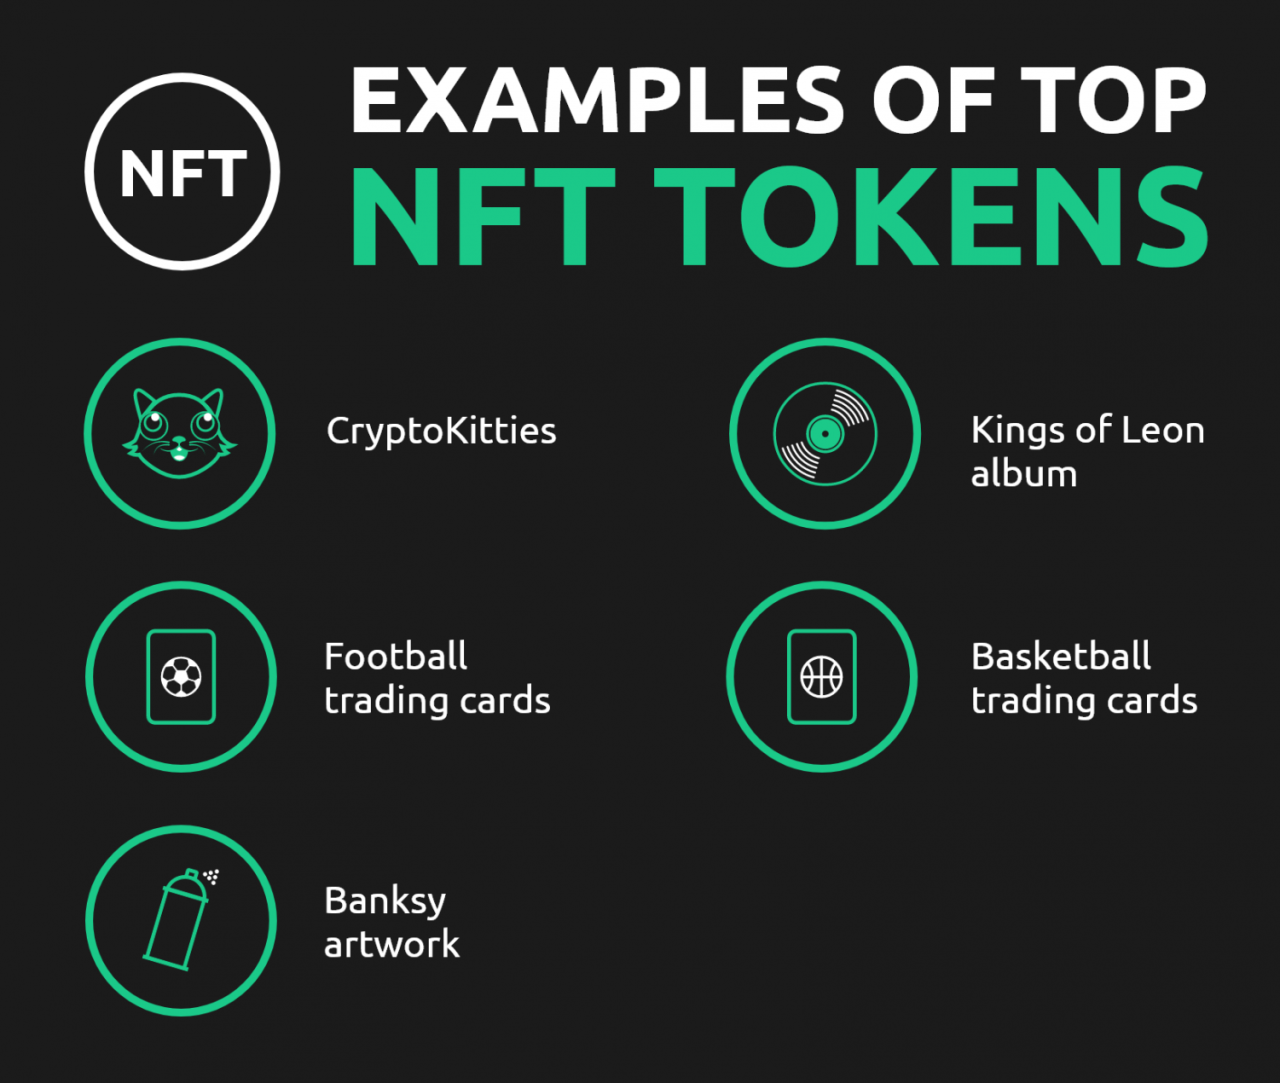 NFTs (Non-Fungible Tokens) - Particularly in unique applications like luxury car shares and gaming rewards.
